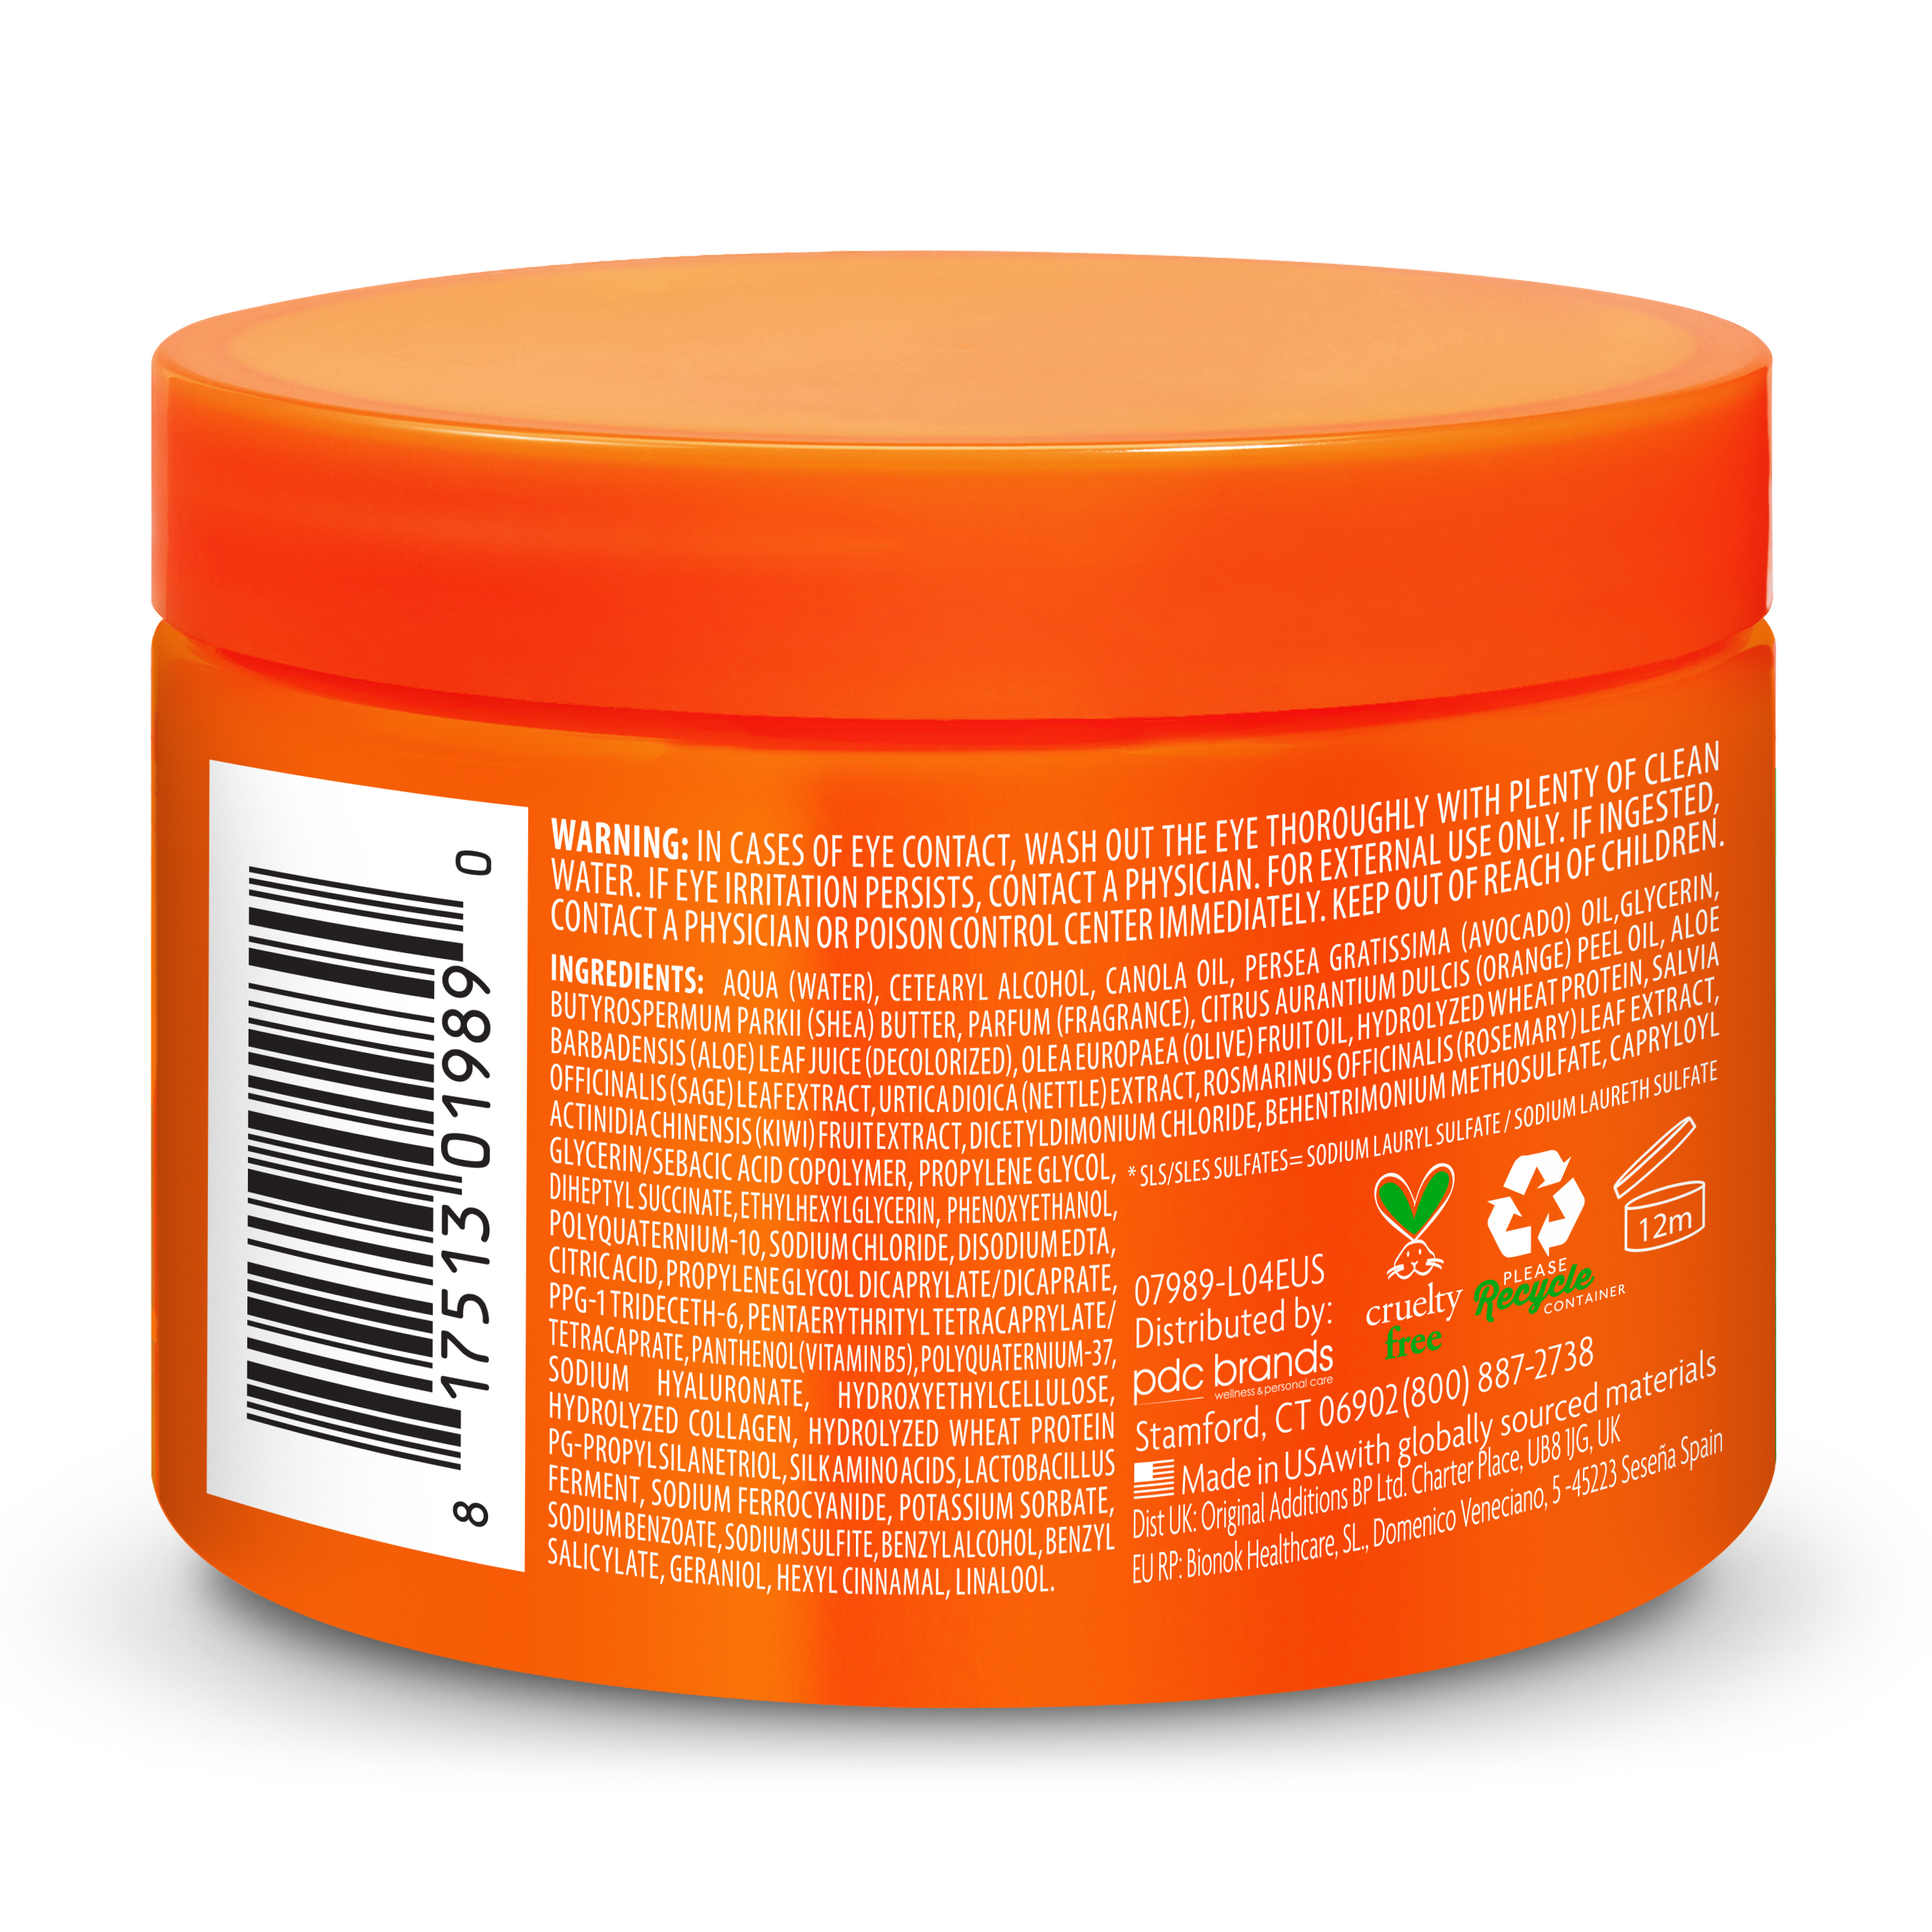 Cantu Avocado Hydrating Leave-in Conditioning Cream with Olive Oil, Aloe, and Shea Butter, 12 oz - image 3 of 10